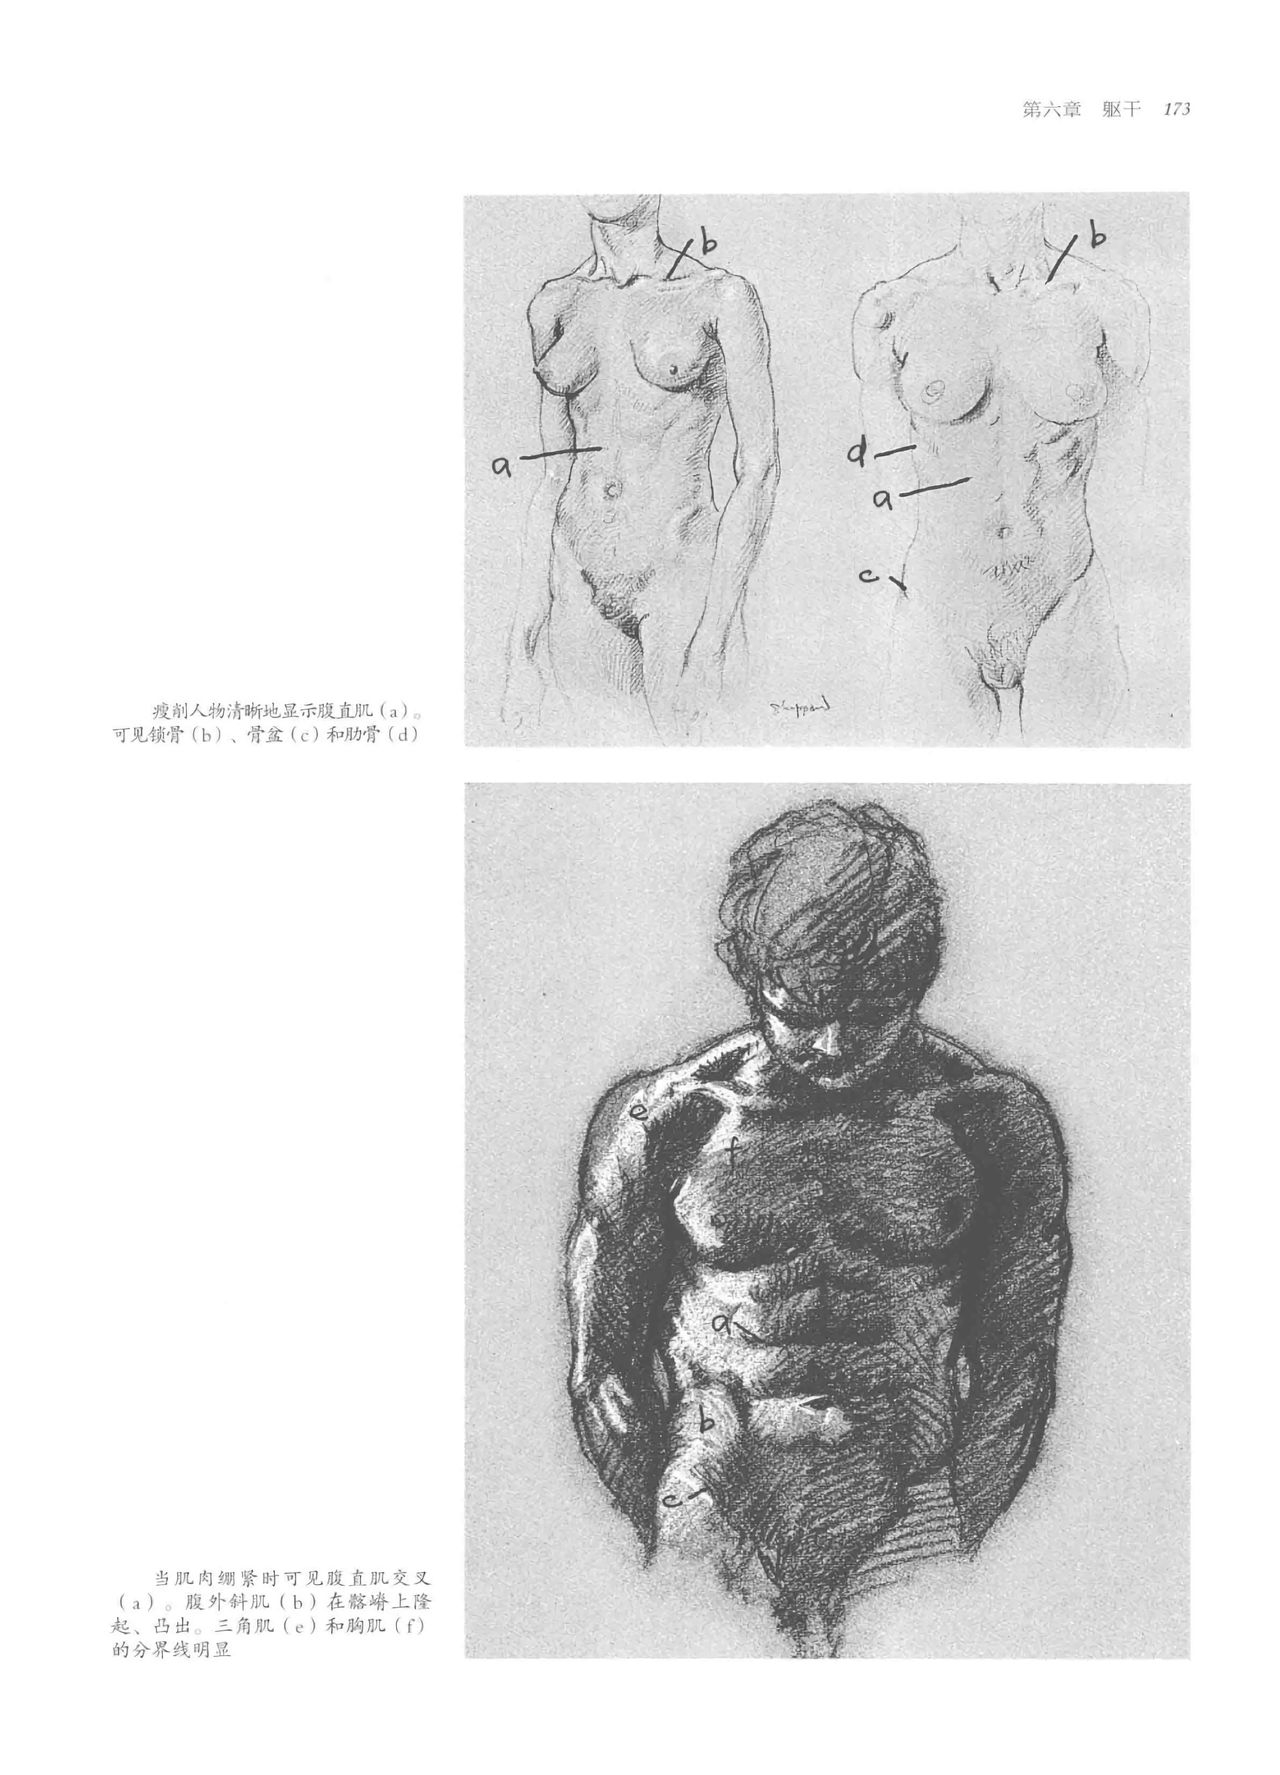 Anatomy-A Complete Guide for Artists - Joseph Sheppard [Chinese] 173